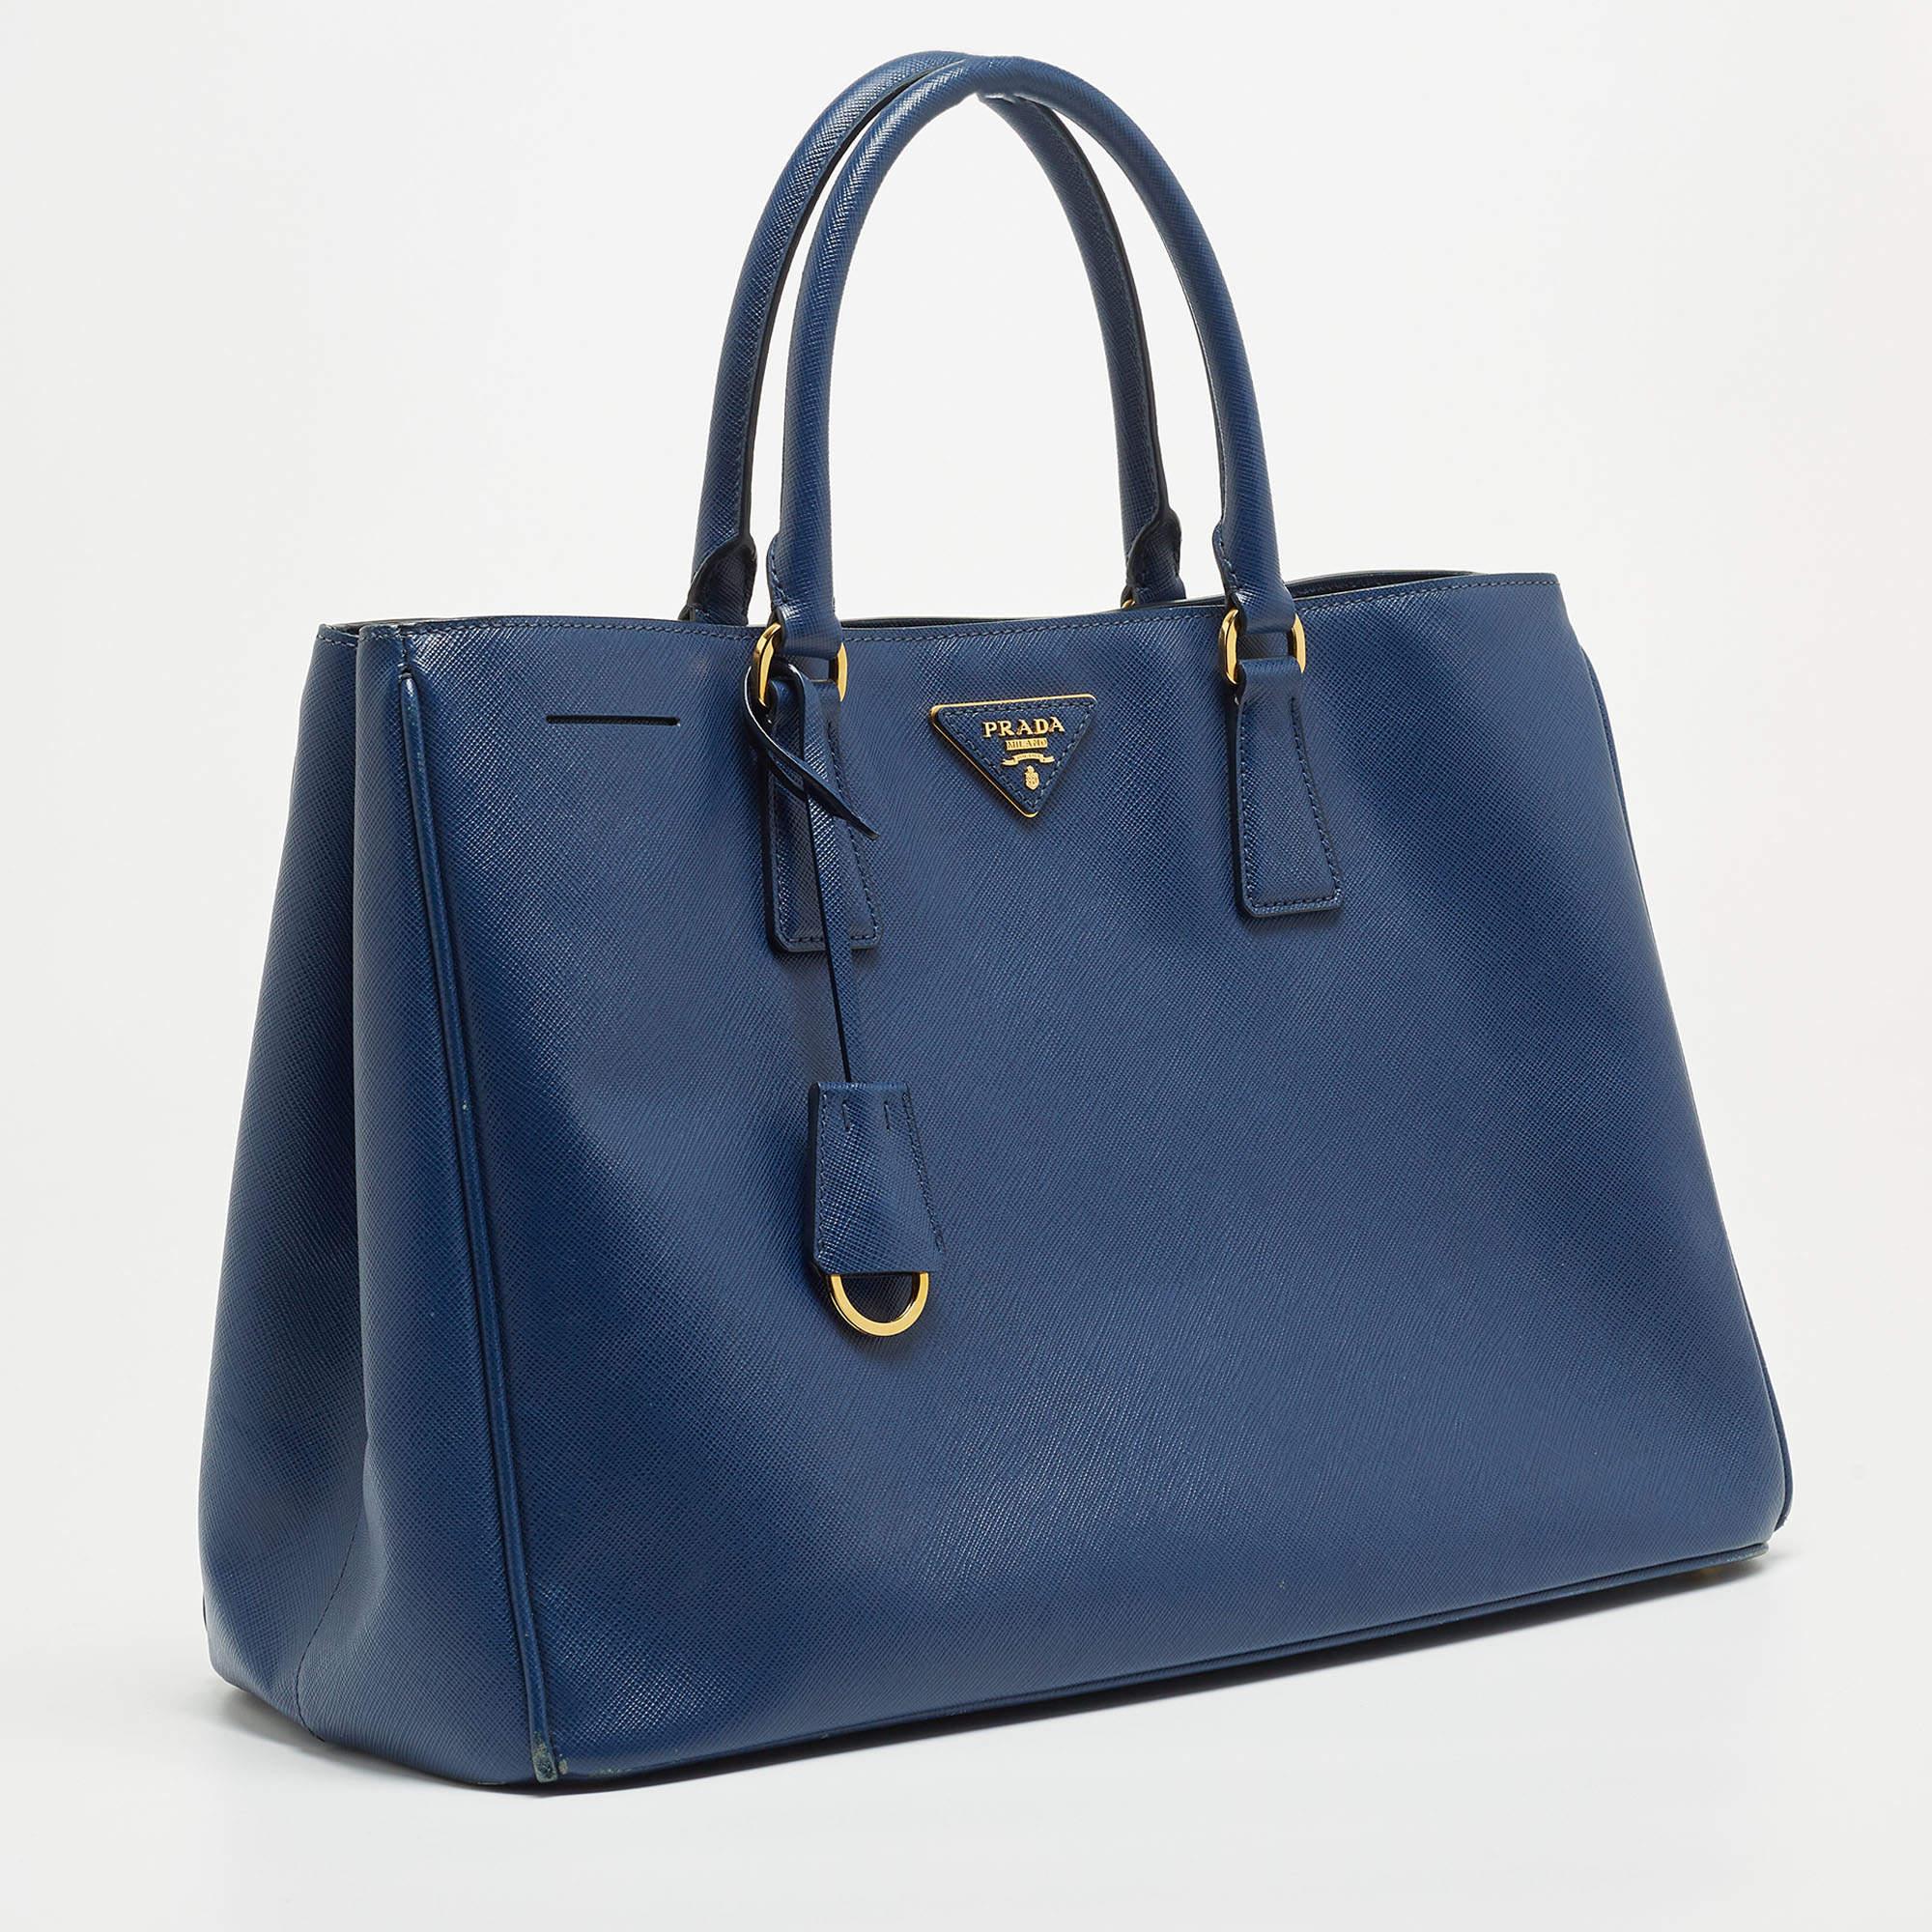 Marked by flawless craftsmanship and enduring appeal, this Prada blue tote is bound to be a versatile and durable accessory. It has a spacious size.

